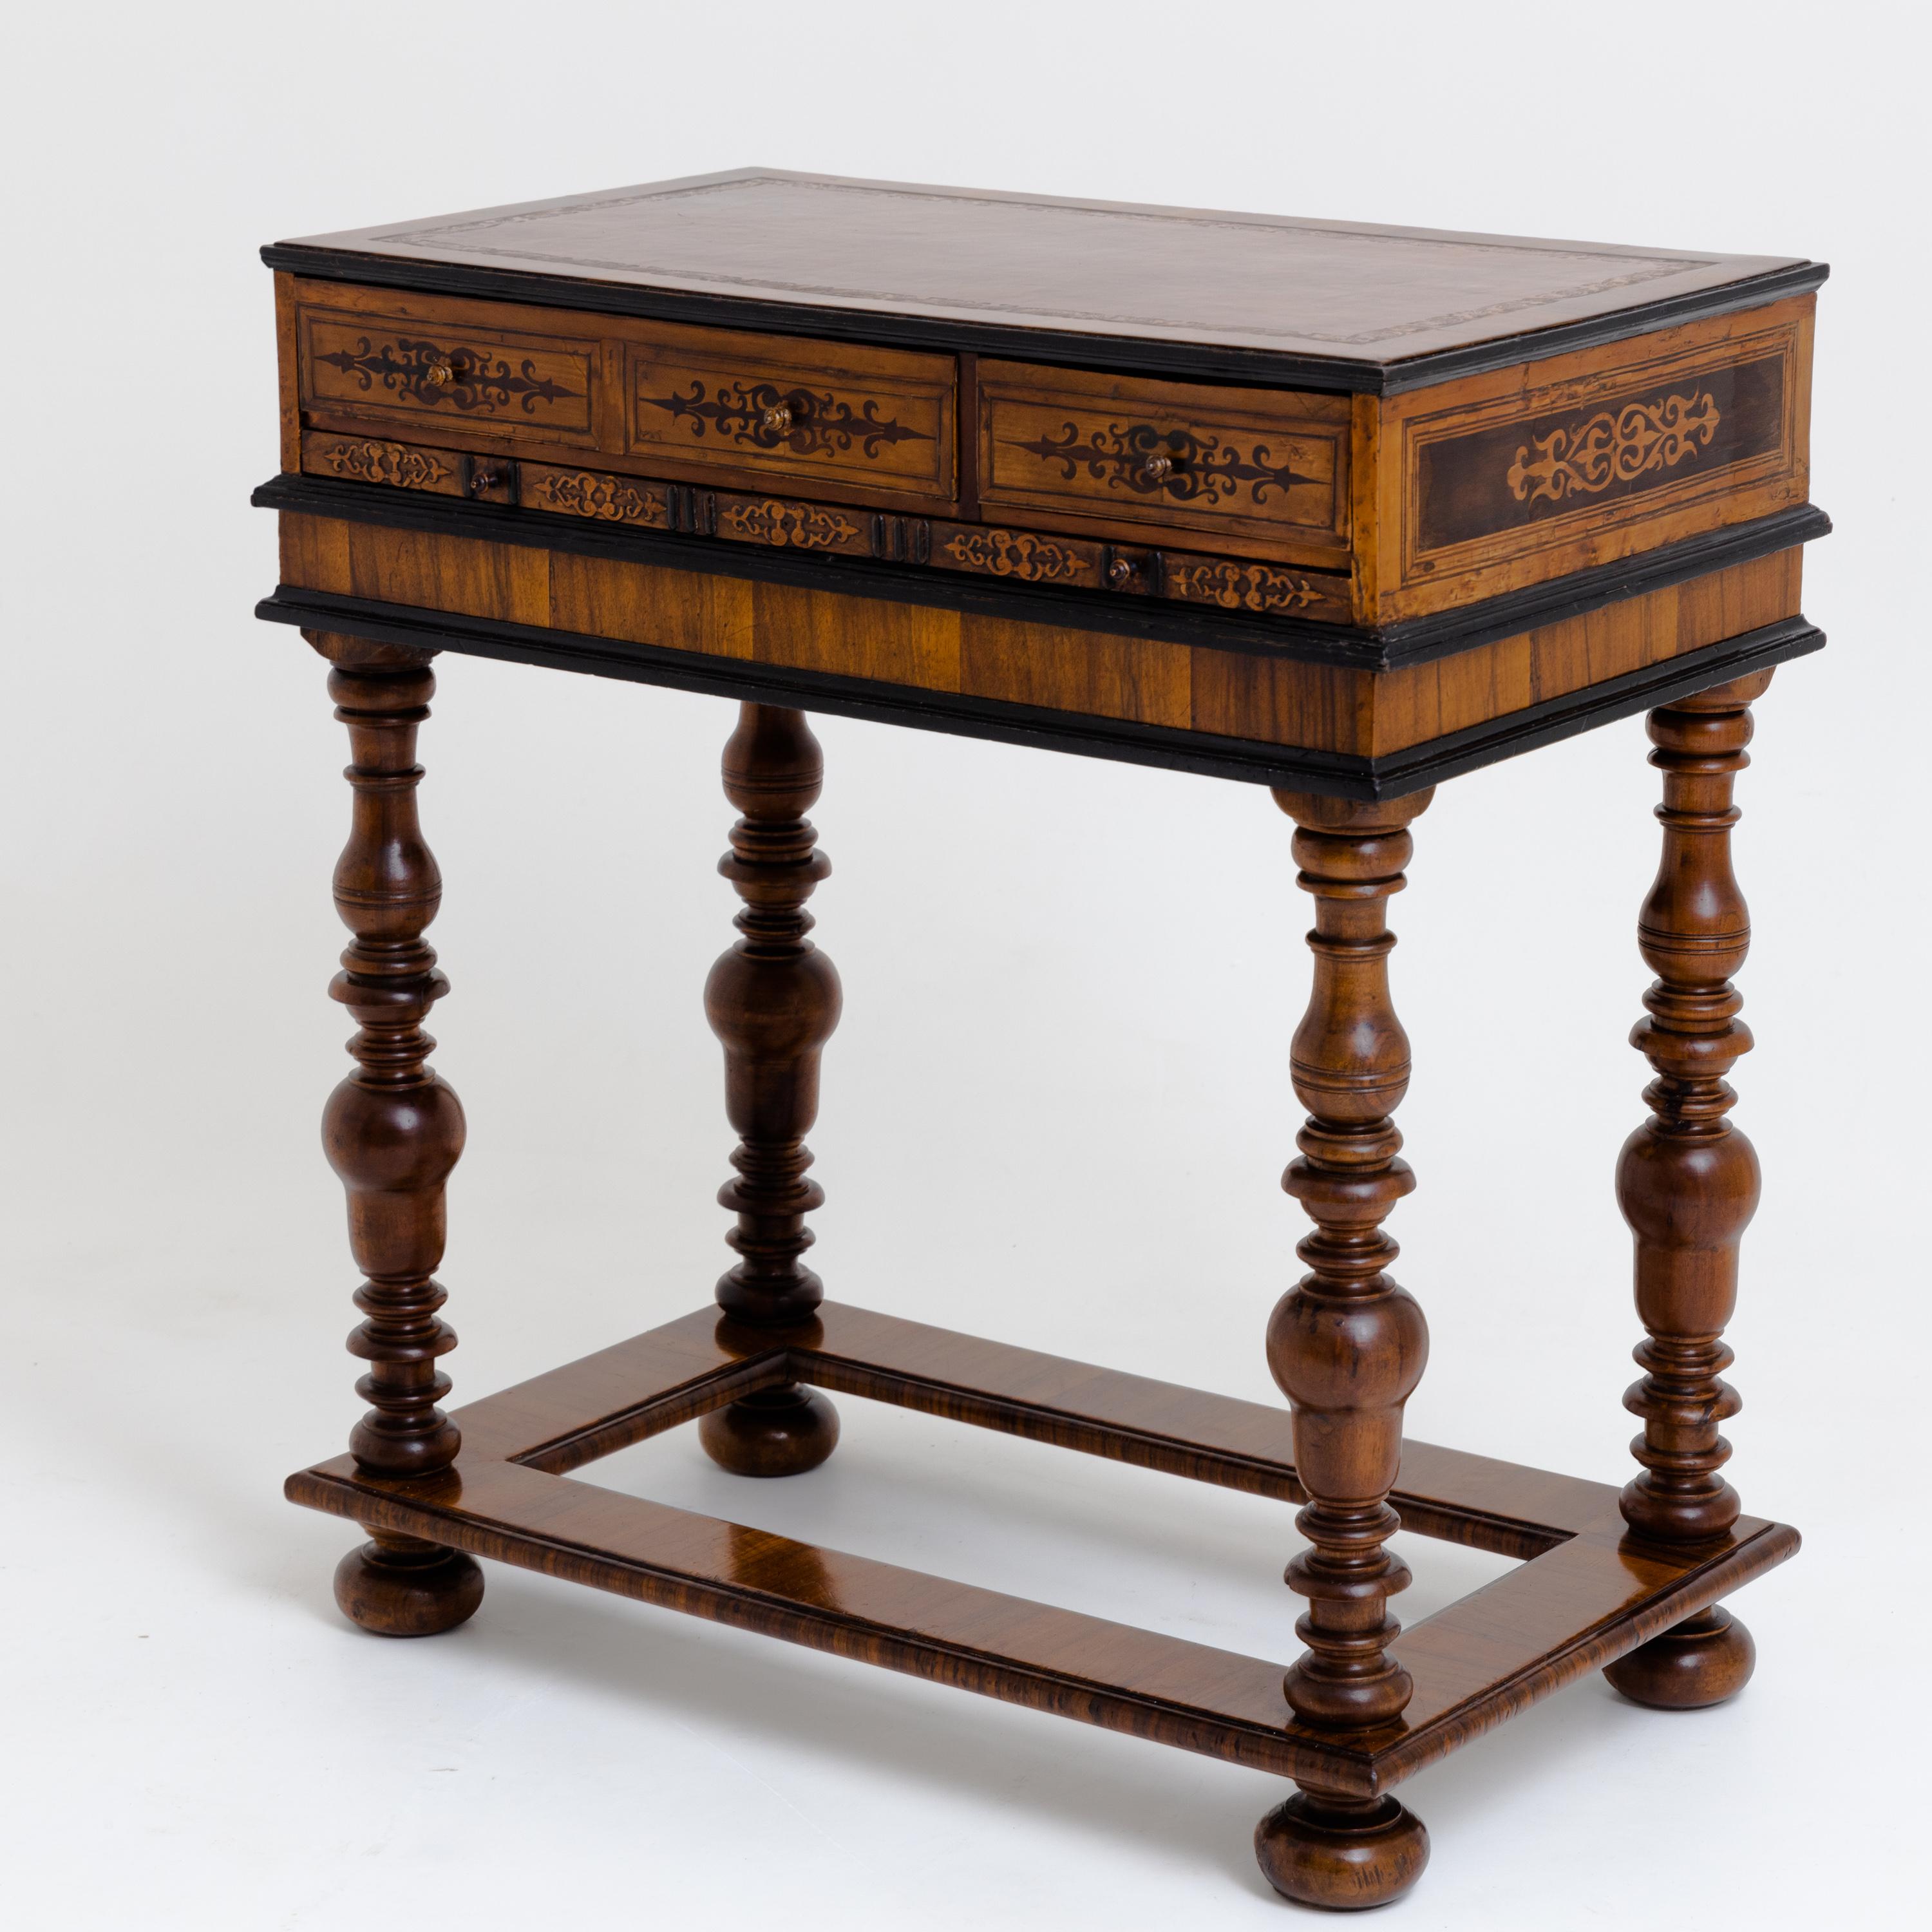 Renaissance game table with extendable boards, including chess, Nine Men's Morris and backgammon, as well as a small drawing desk with an adjustable writing surface, which is decorated with inlays. The base with baluster legs is secondary.